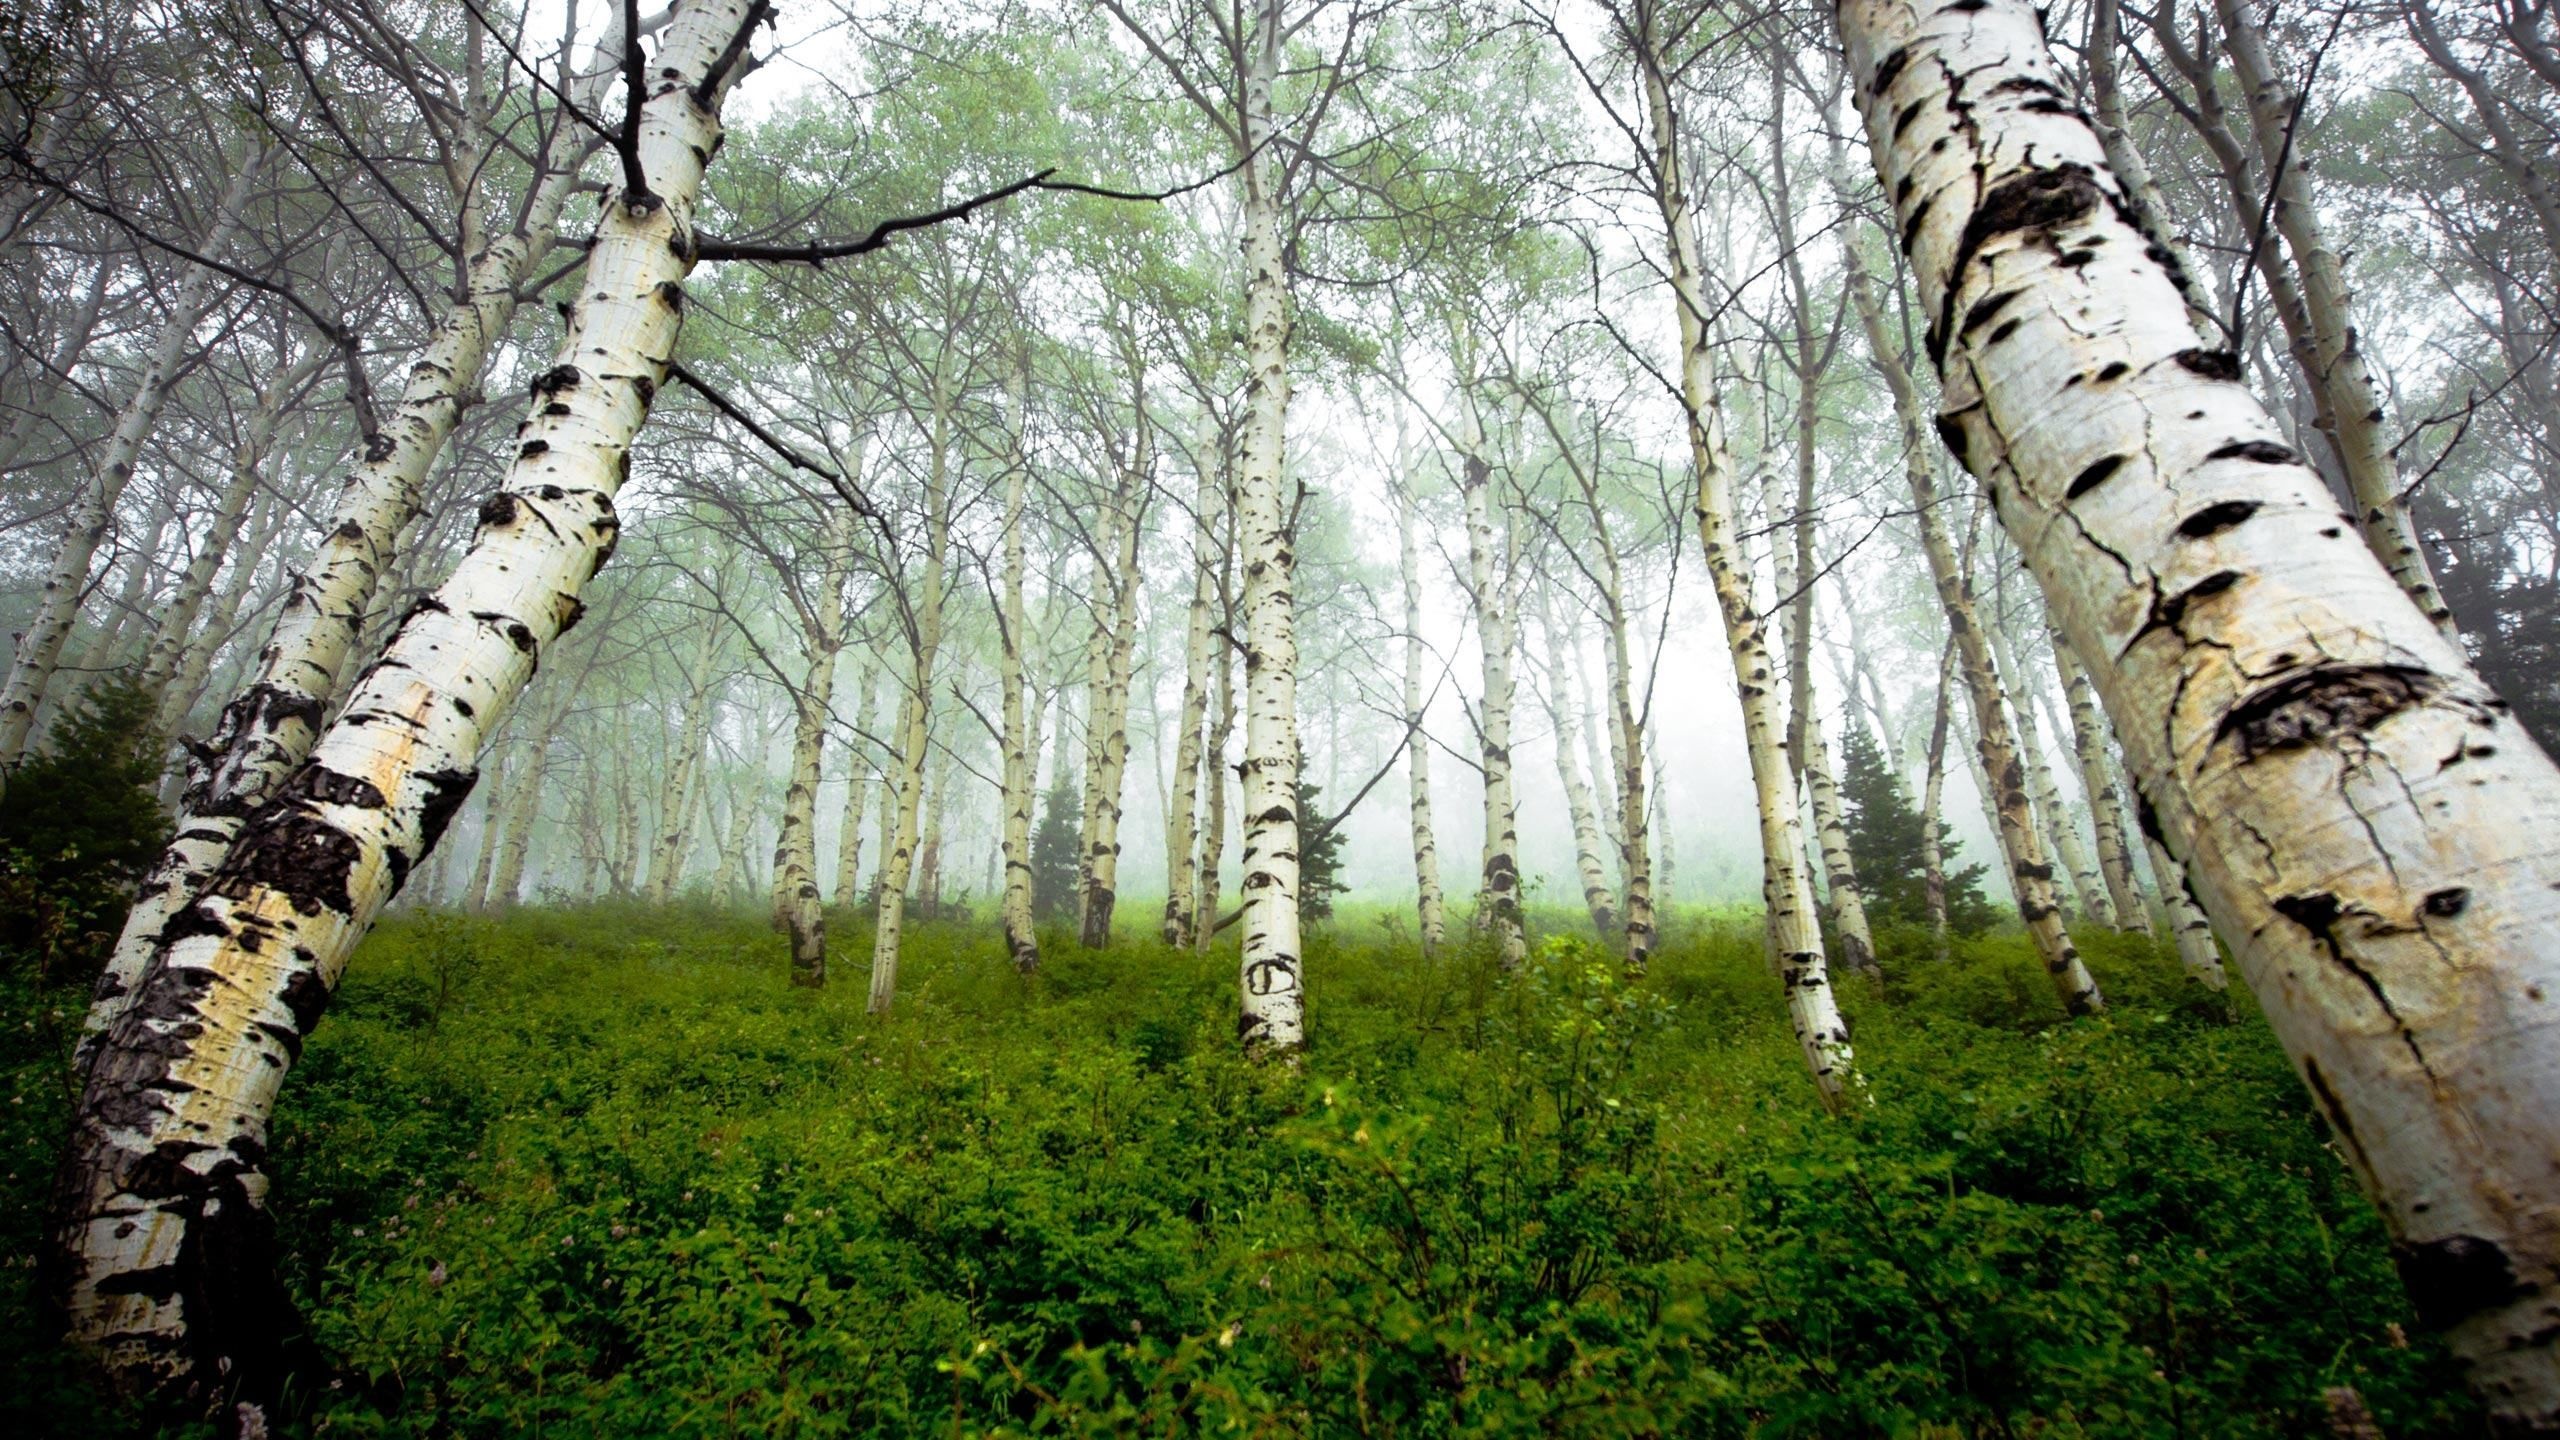 Birch forest wallpapers, Nature's serenity, Artistic beauty, Tranquil backdrop, 2560x1440 HD Desktop